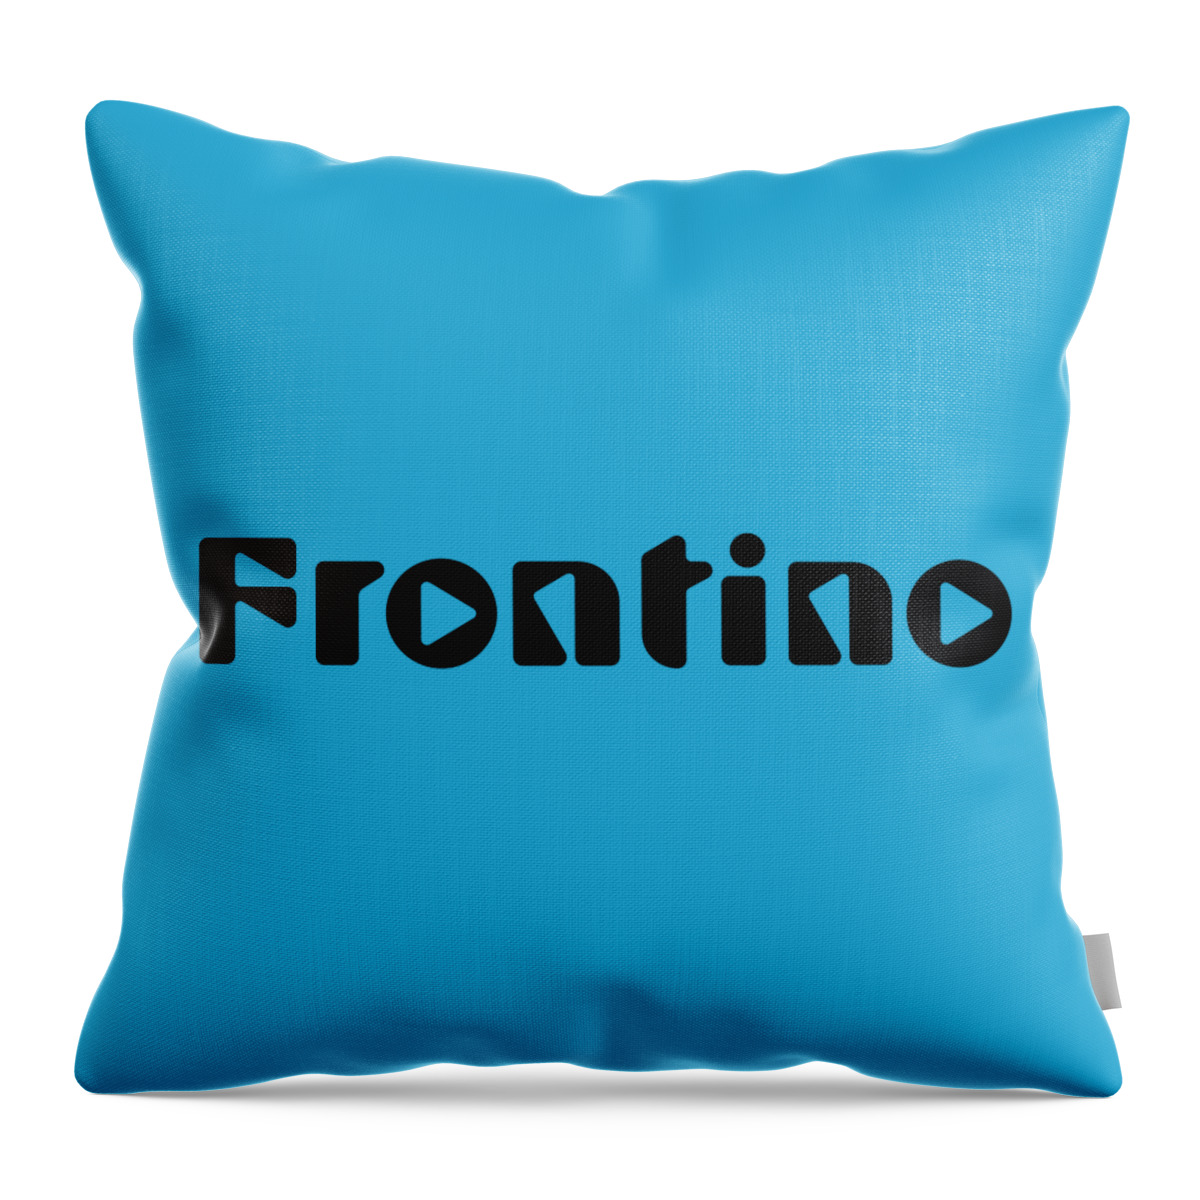 Frontino Throw Pillow featuring the digital art Frontino #Frontino #1 by TintoDesigns